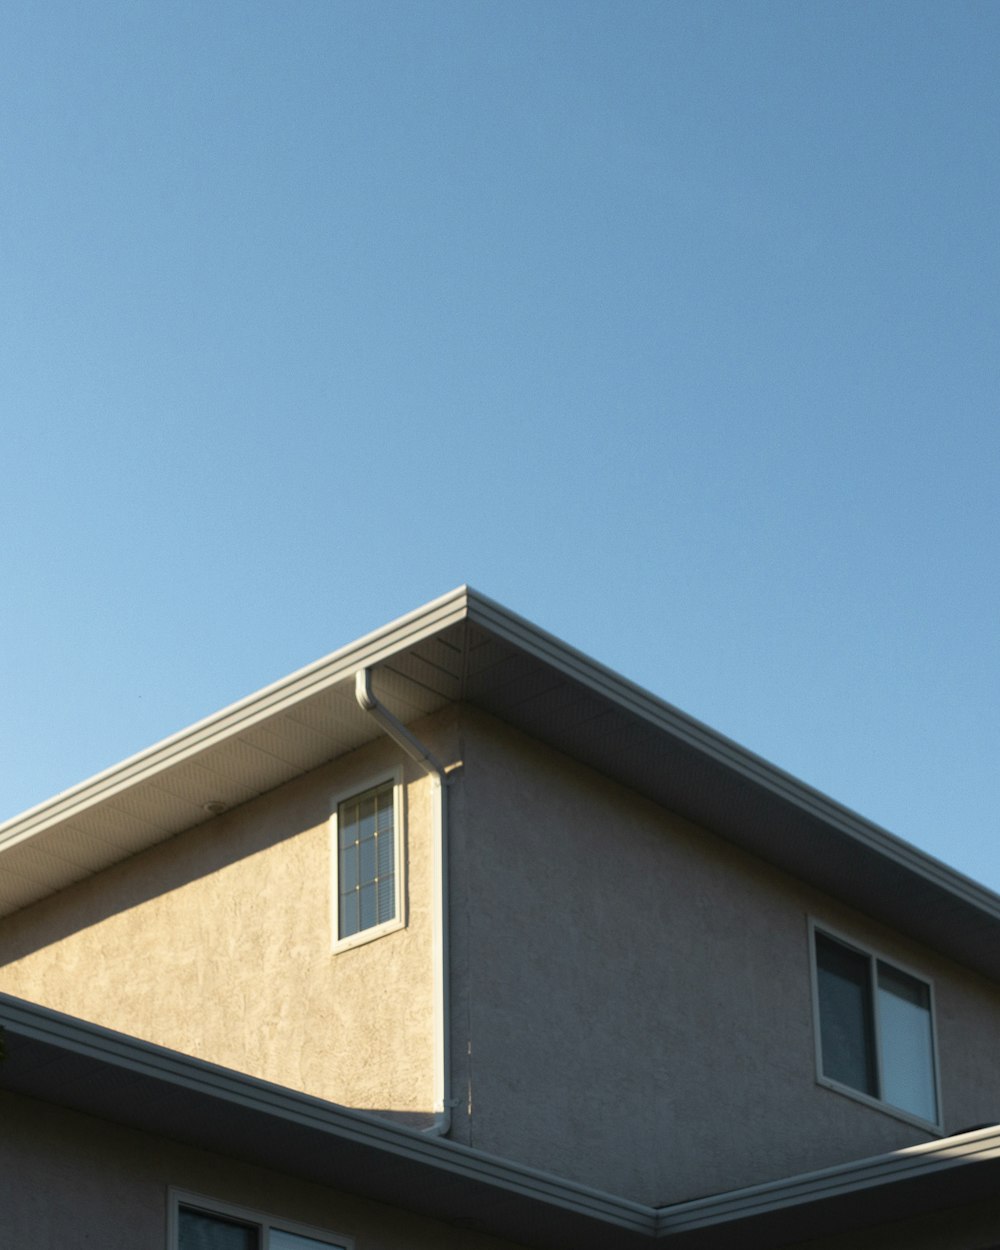 brown concrete house under blue sky during daytime